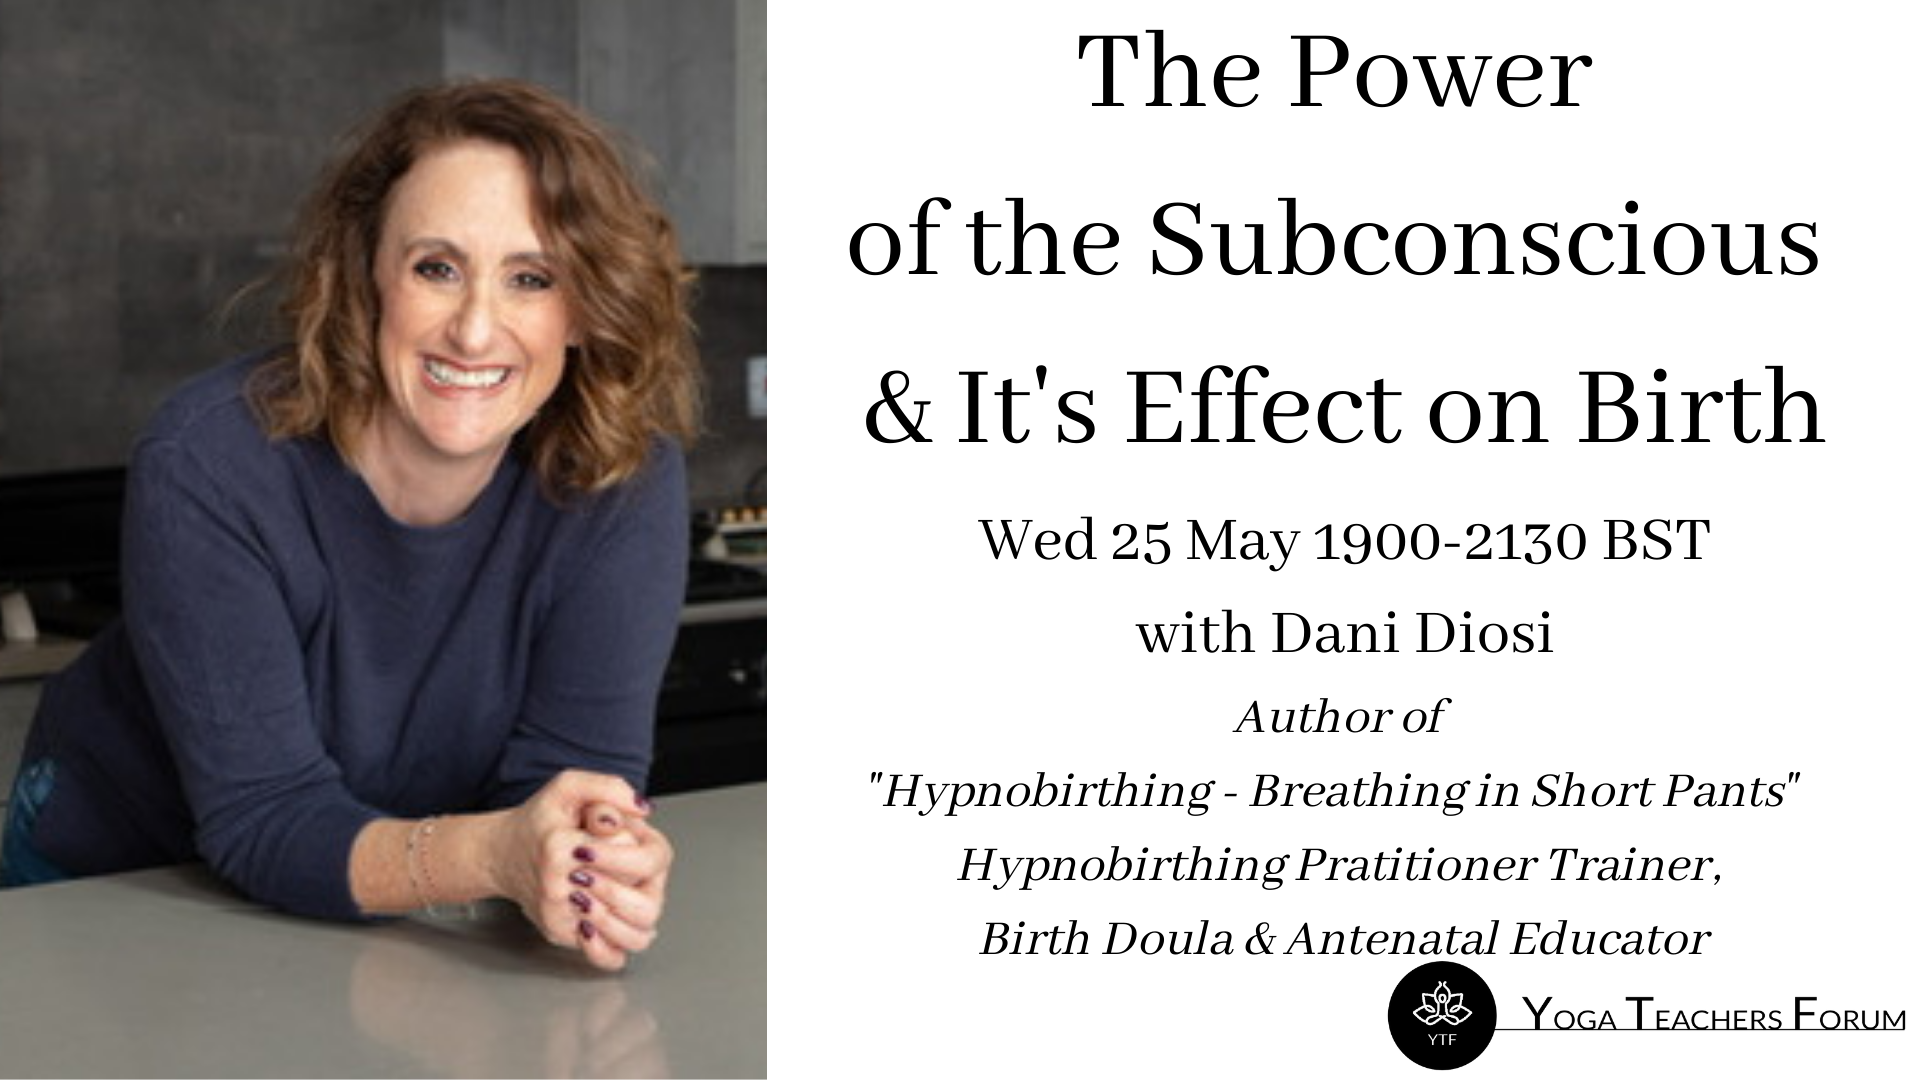 The Power of the Subconscious & It's Effect on Birth